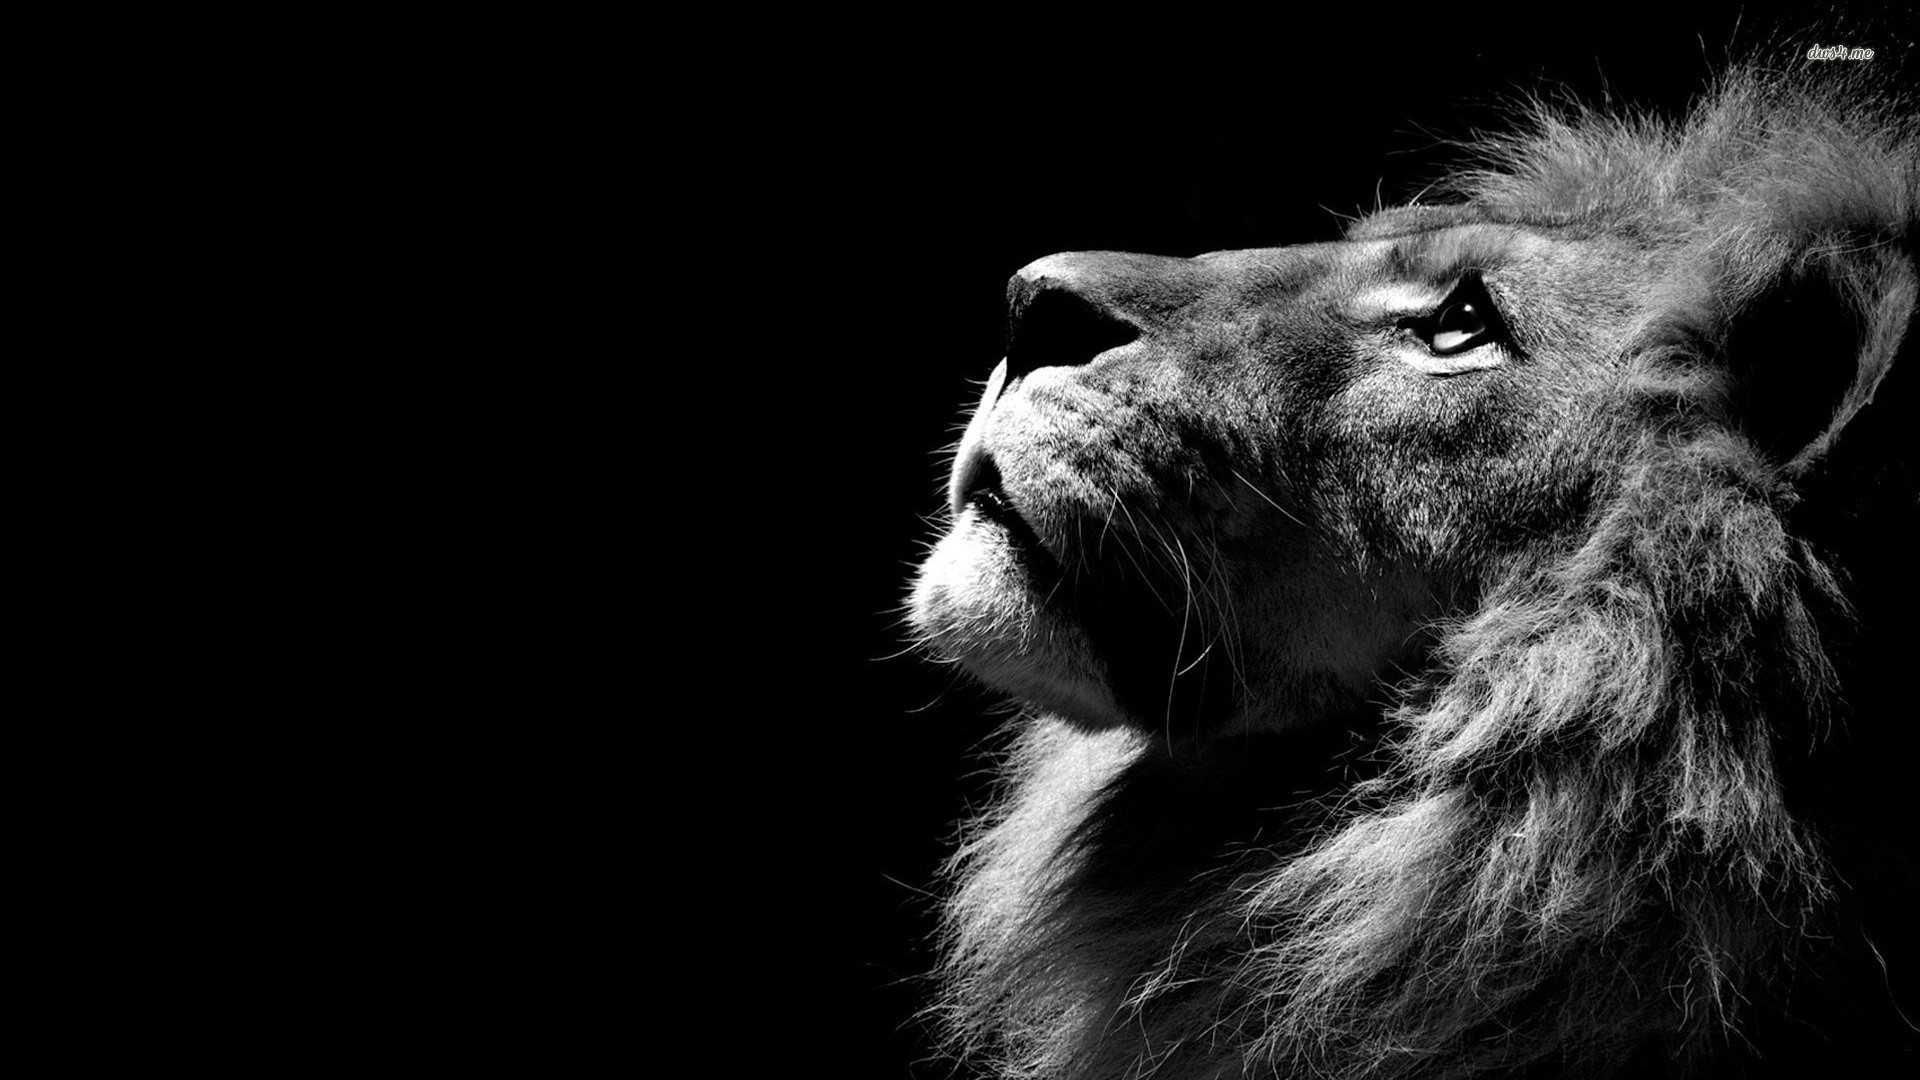 Lion in the shadows wallpaper - Animal wallpapers - #12072